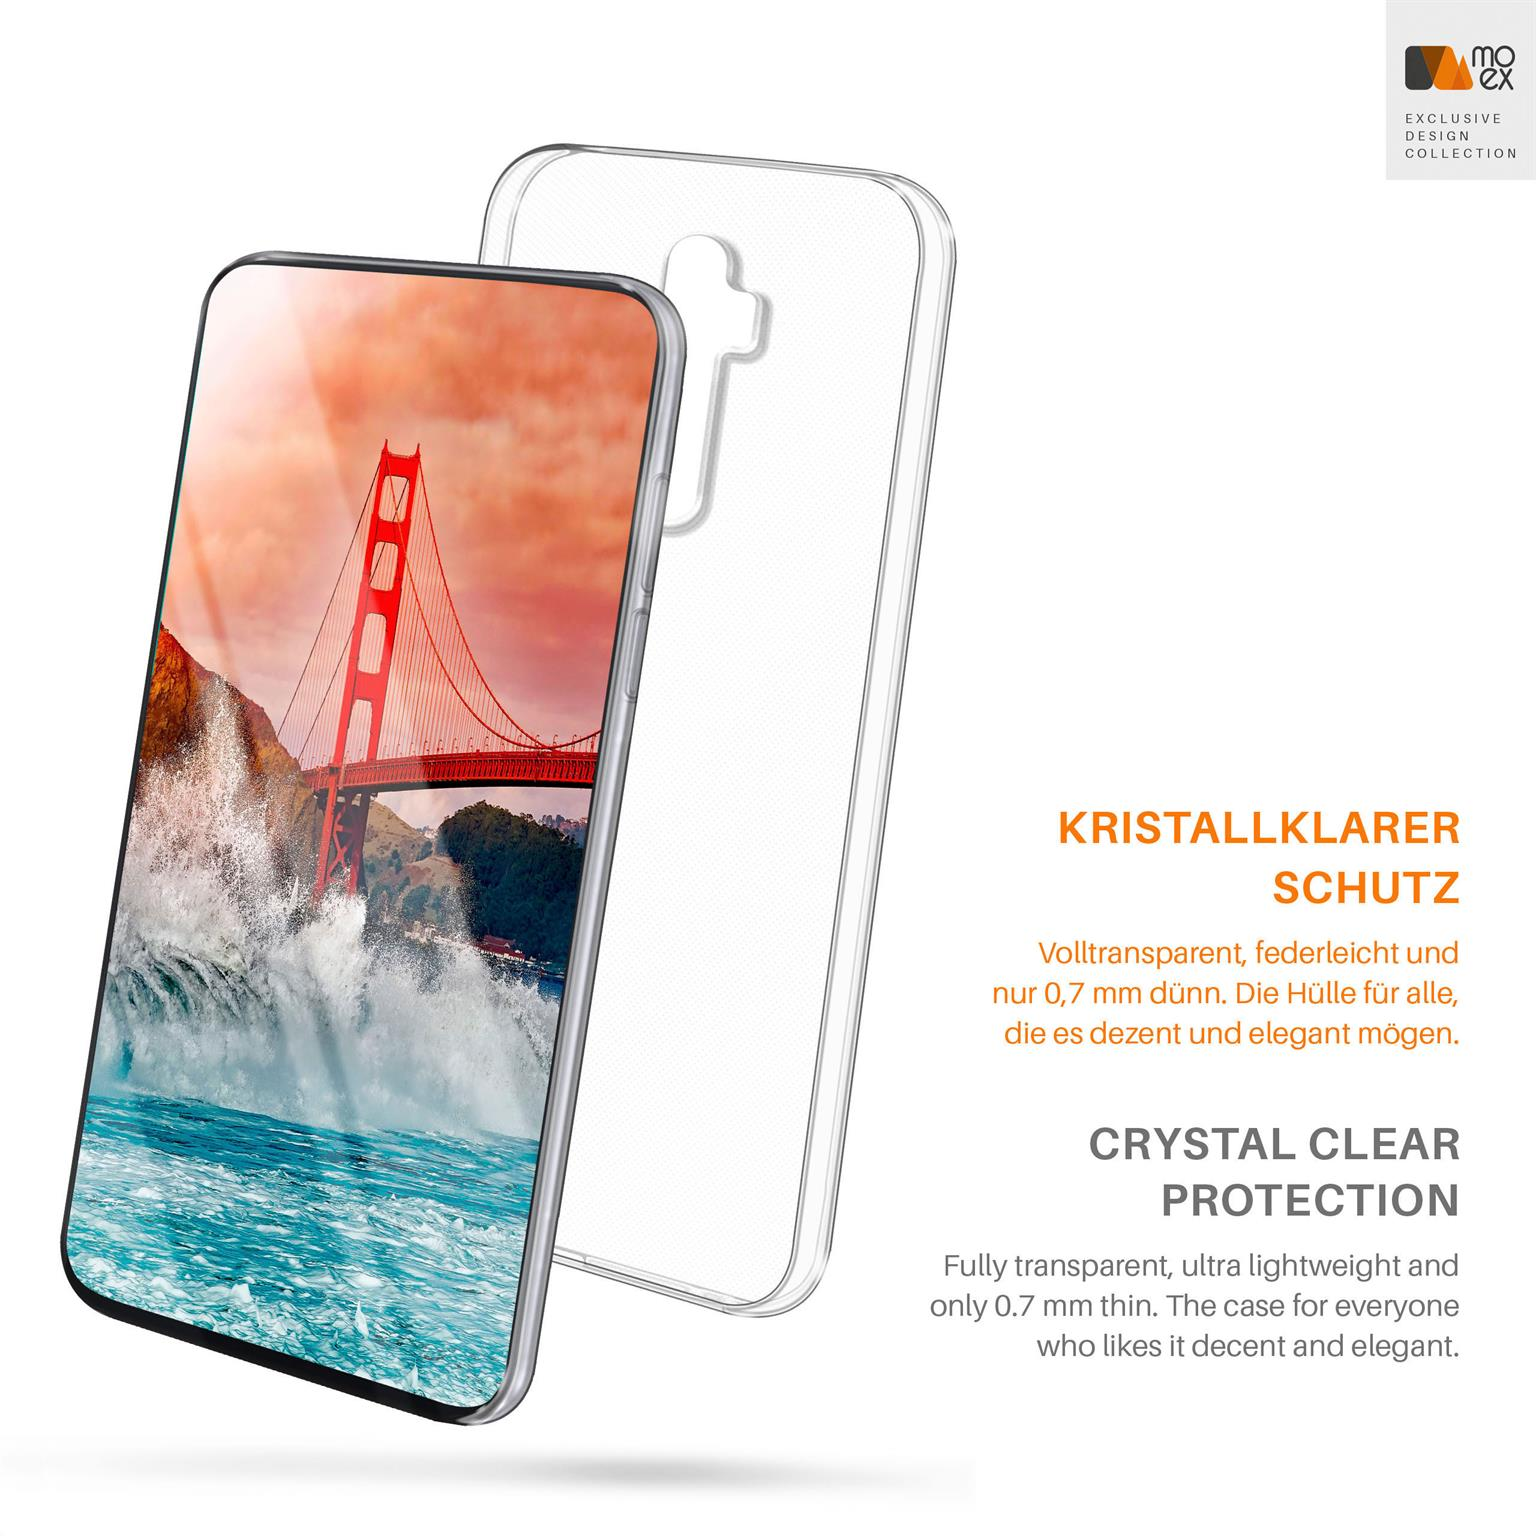 MOEX Aero Case, Backcover, Reno2, Oppo, Crystal-Clear